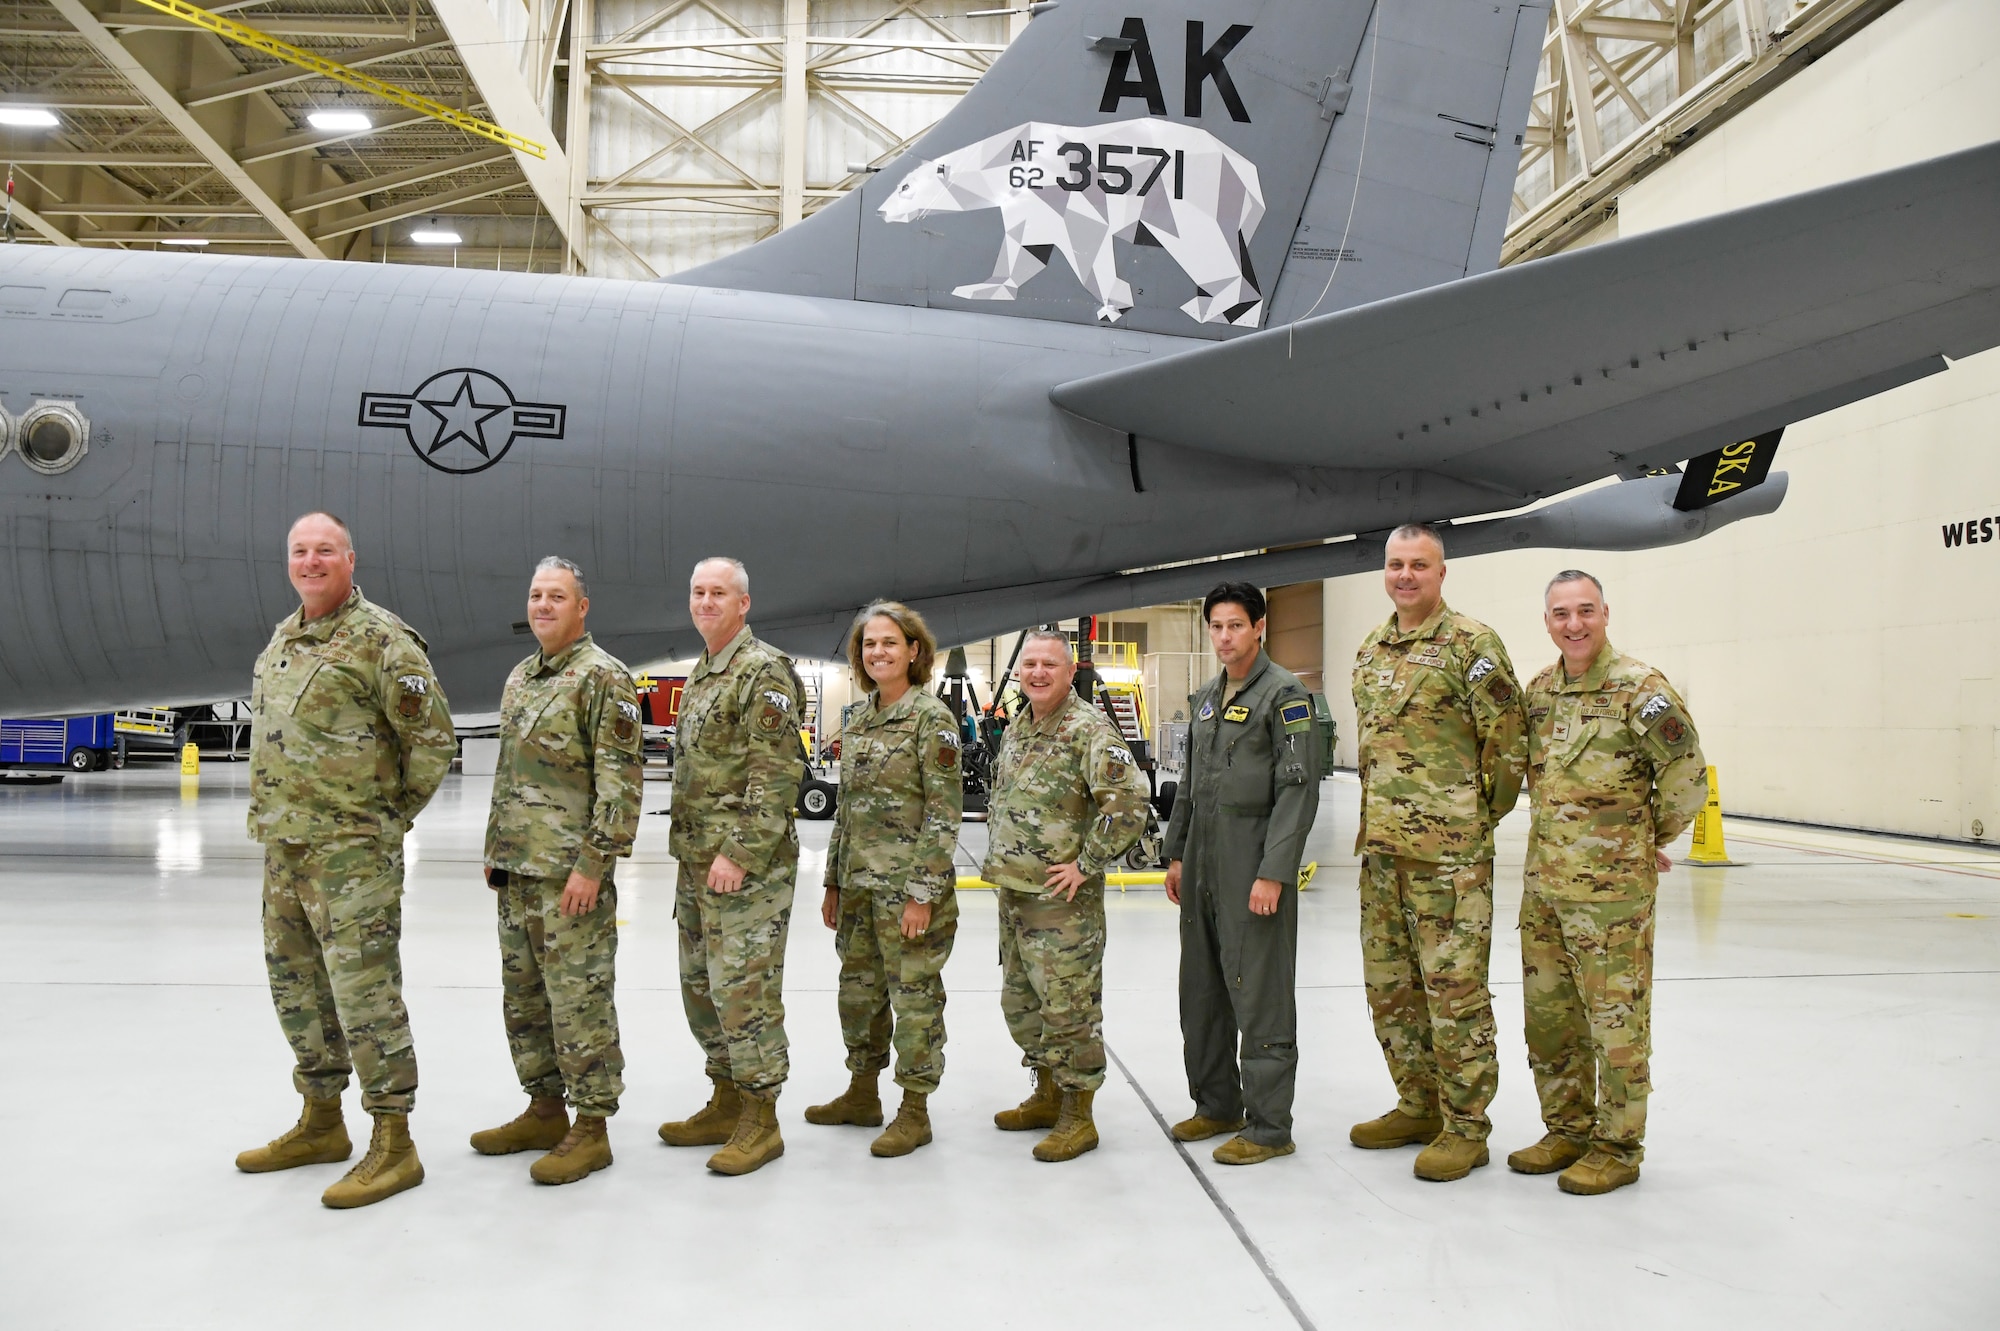 Maj. Gen. Laurie M. Farris, Air National Guard Assistant to the commander, Air Mobility Command, poses for a photo with members of the 168th Wing, the farthest-north KC-135 refueling unit, while visiting the 168th Maintenance Group. (U.S. Air National Guard photo by Senior Master Sgt. Julie Avey)